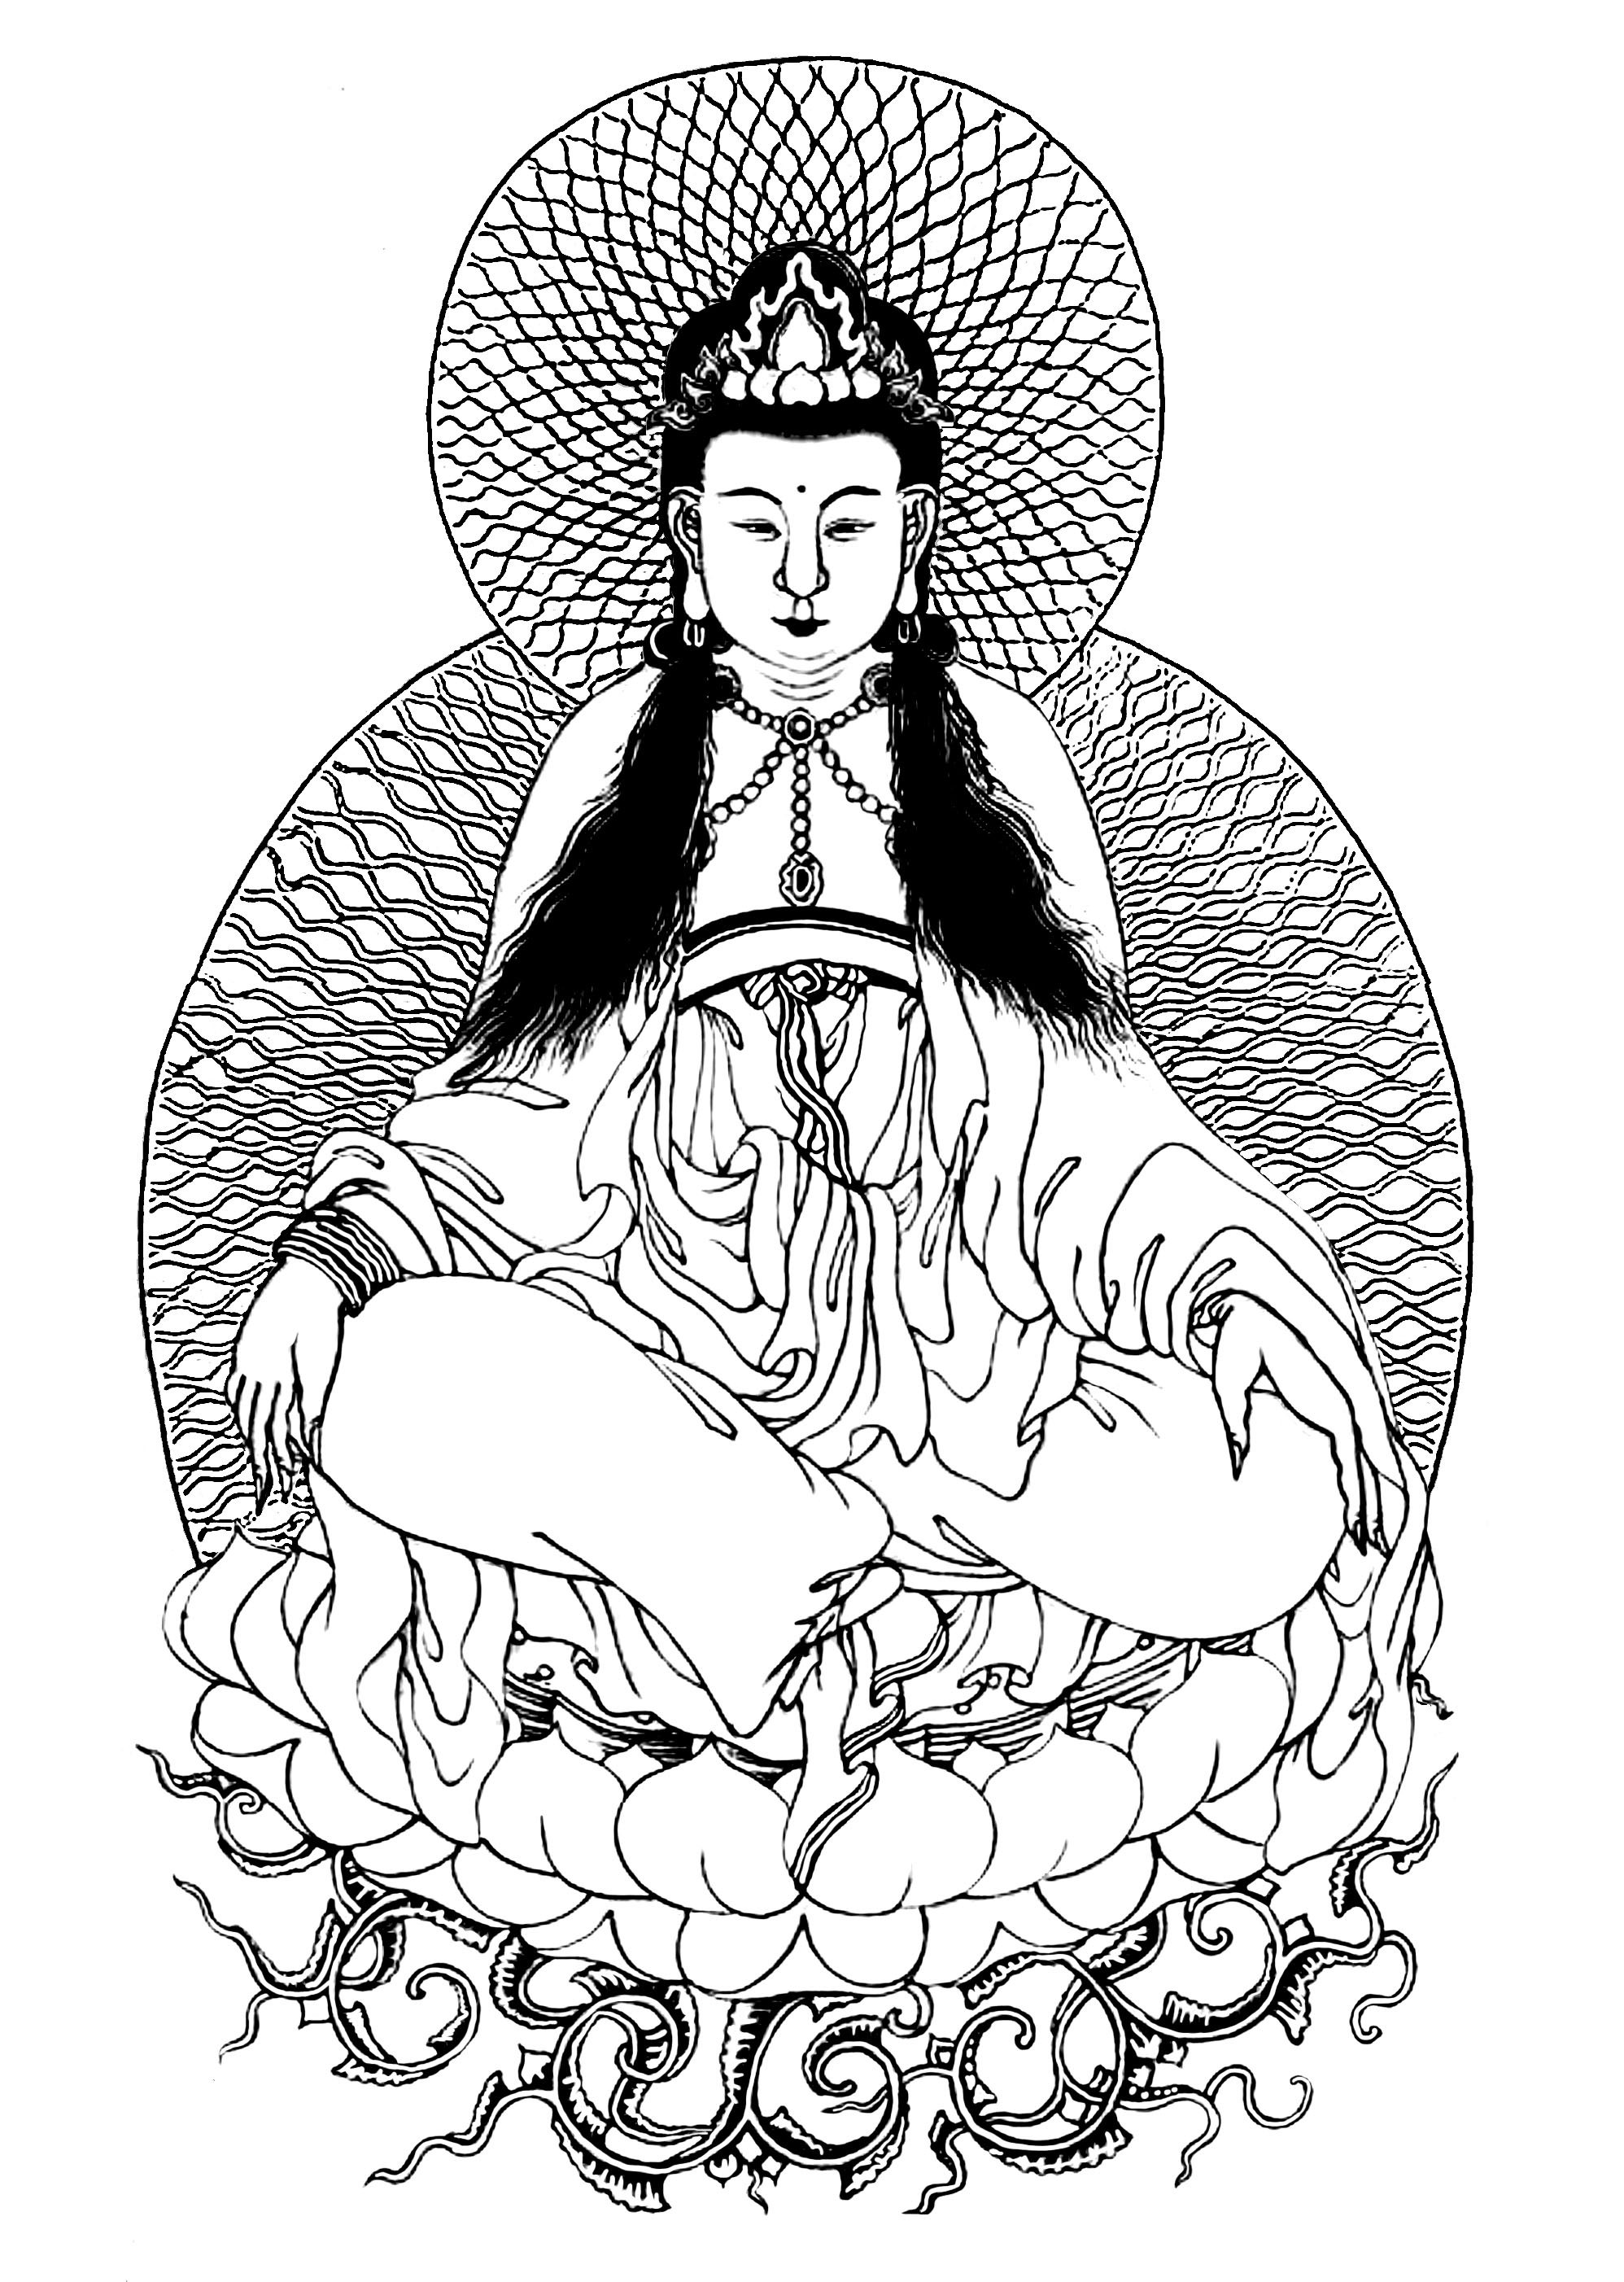 Coloring guanyin buddhist goddess of mercy